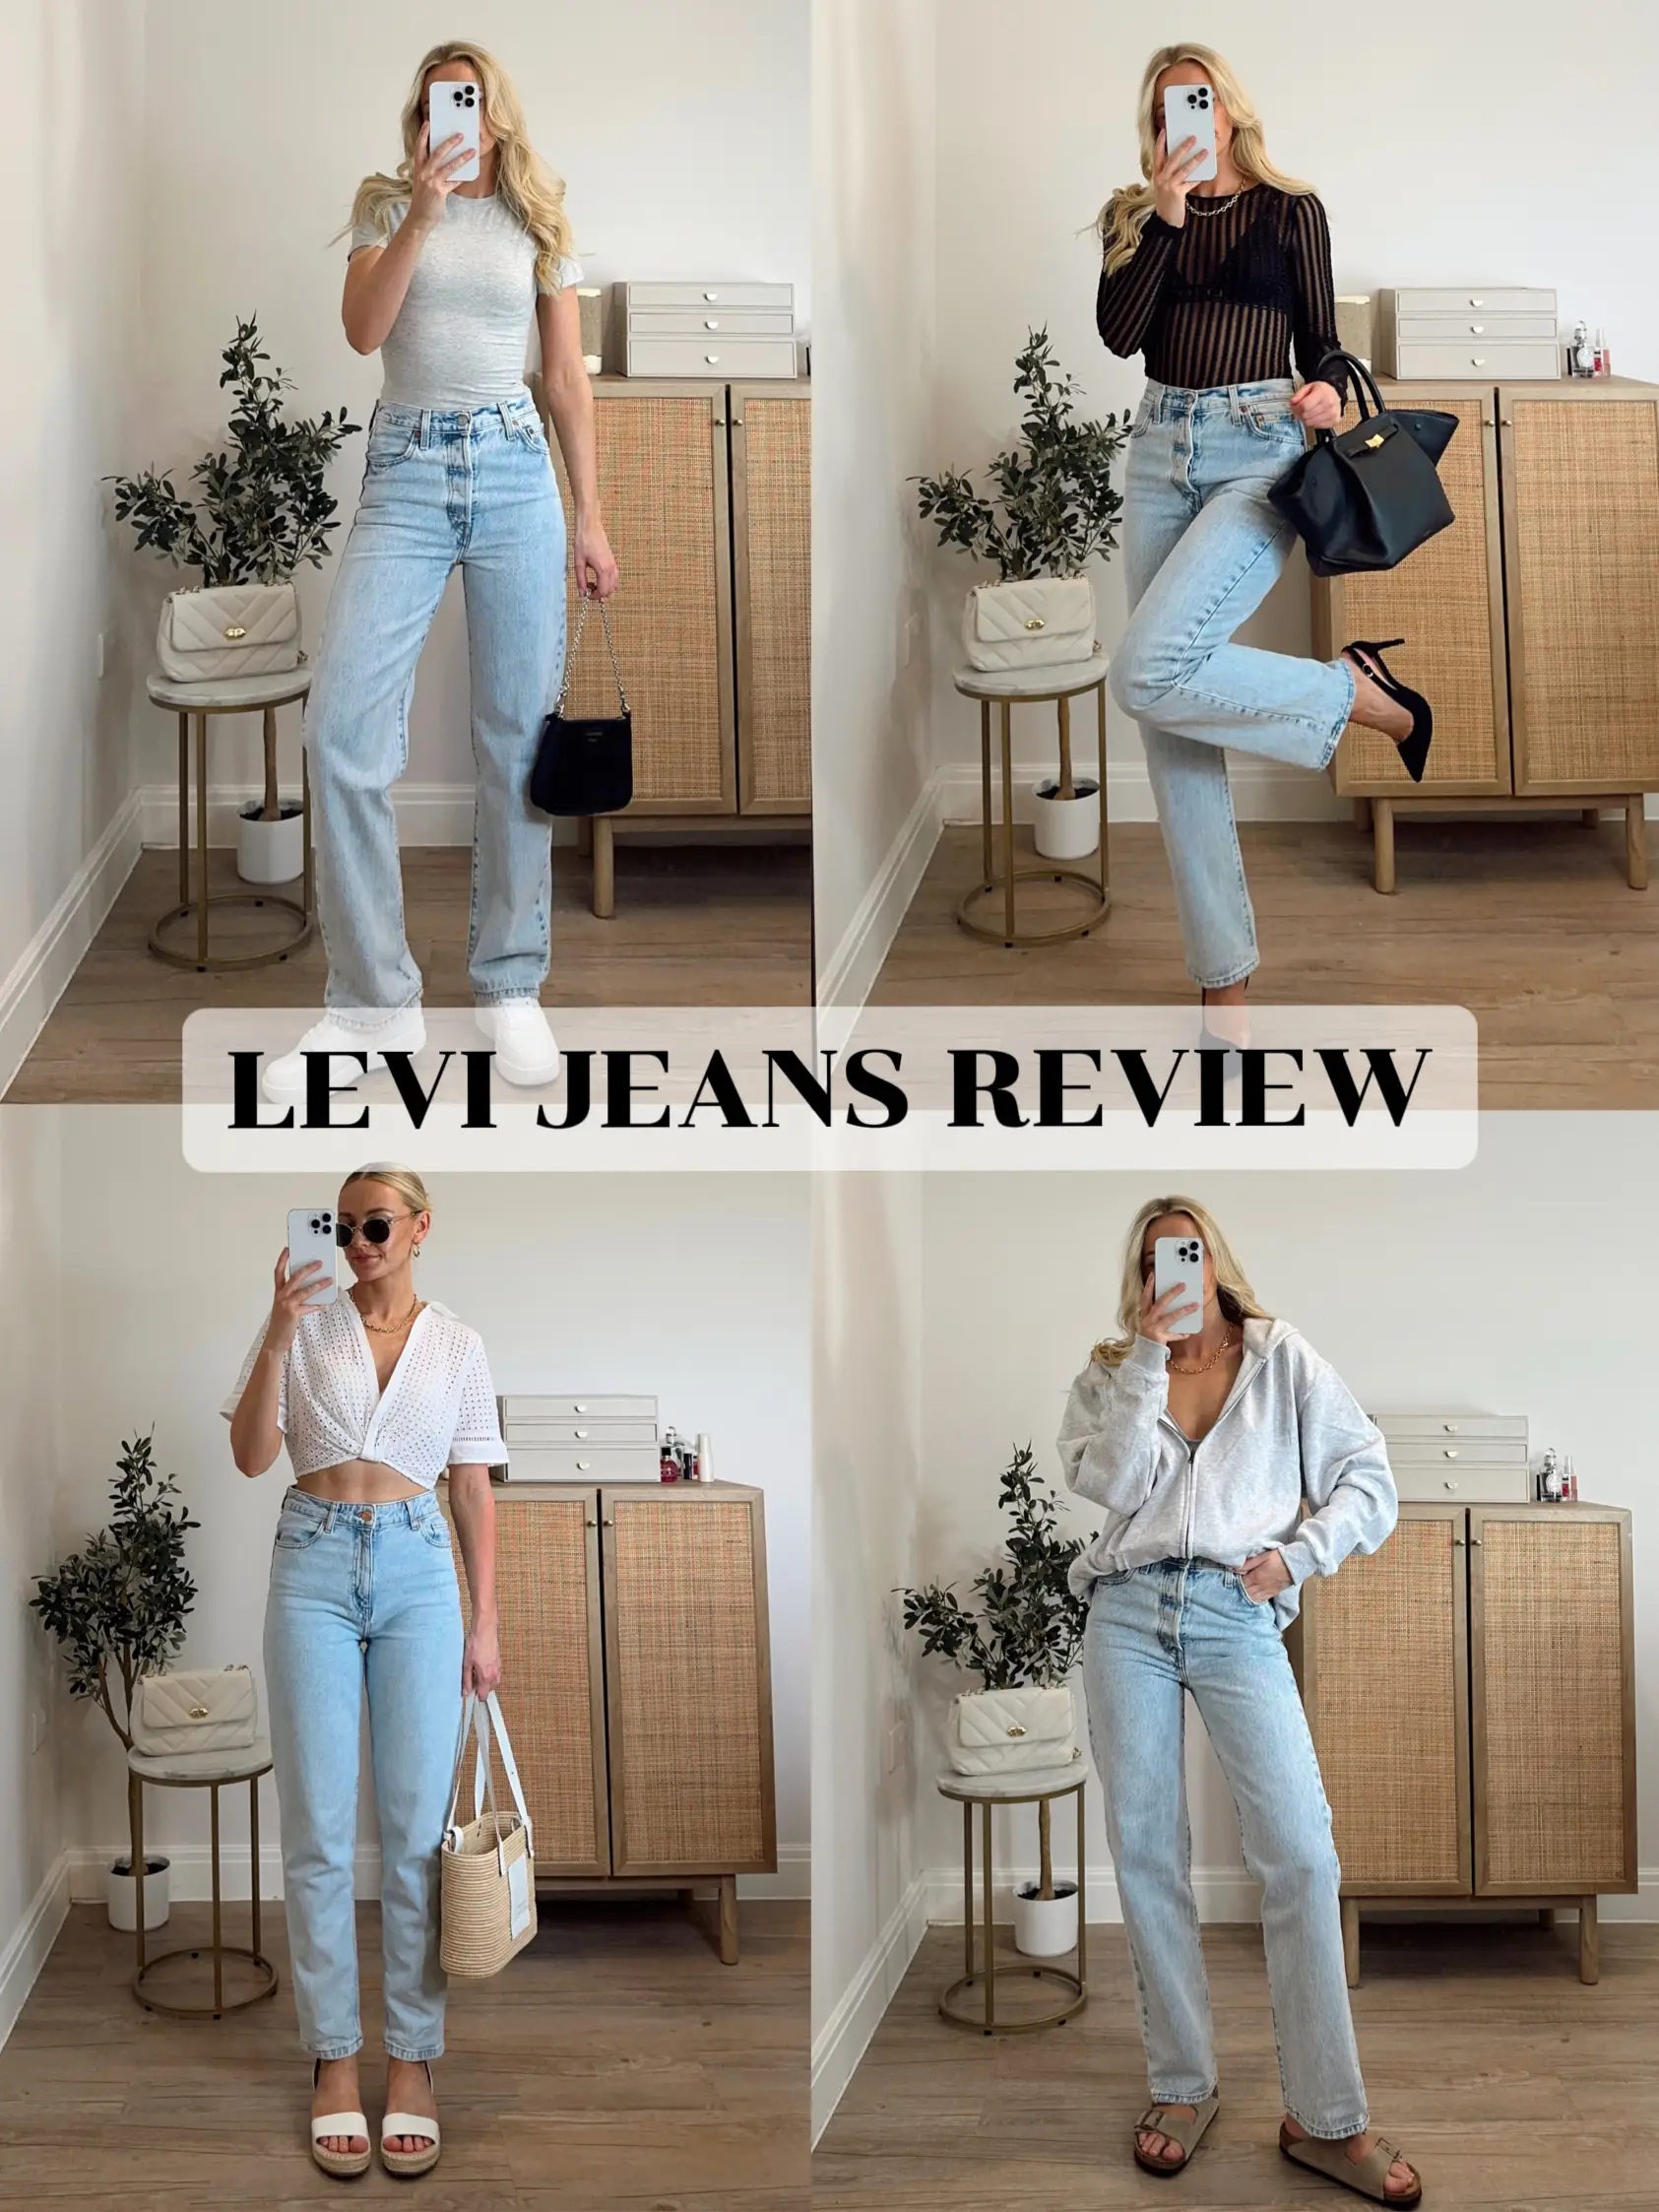 Levi's Women's 501 Original Fit Jeans (Also Available in Plus